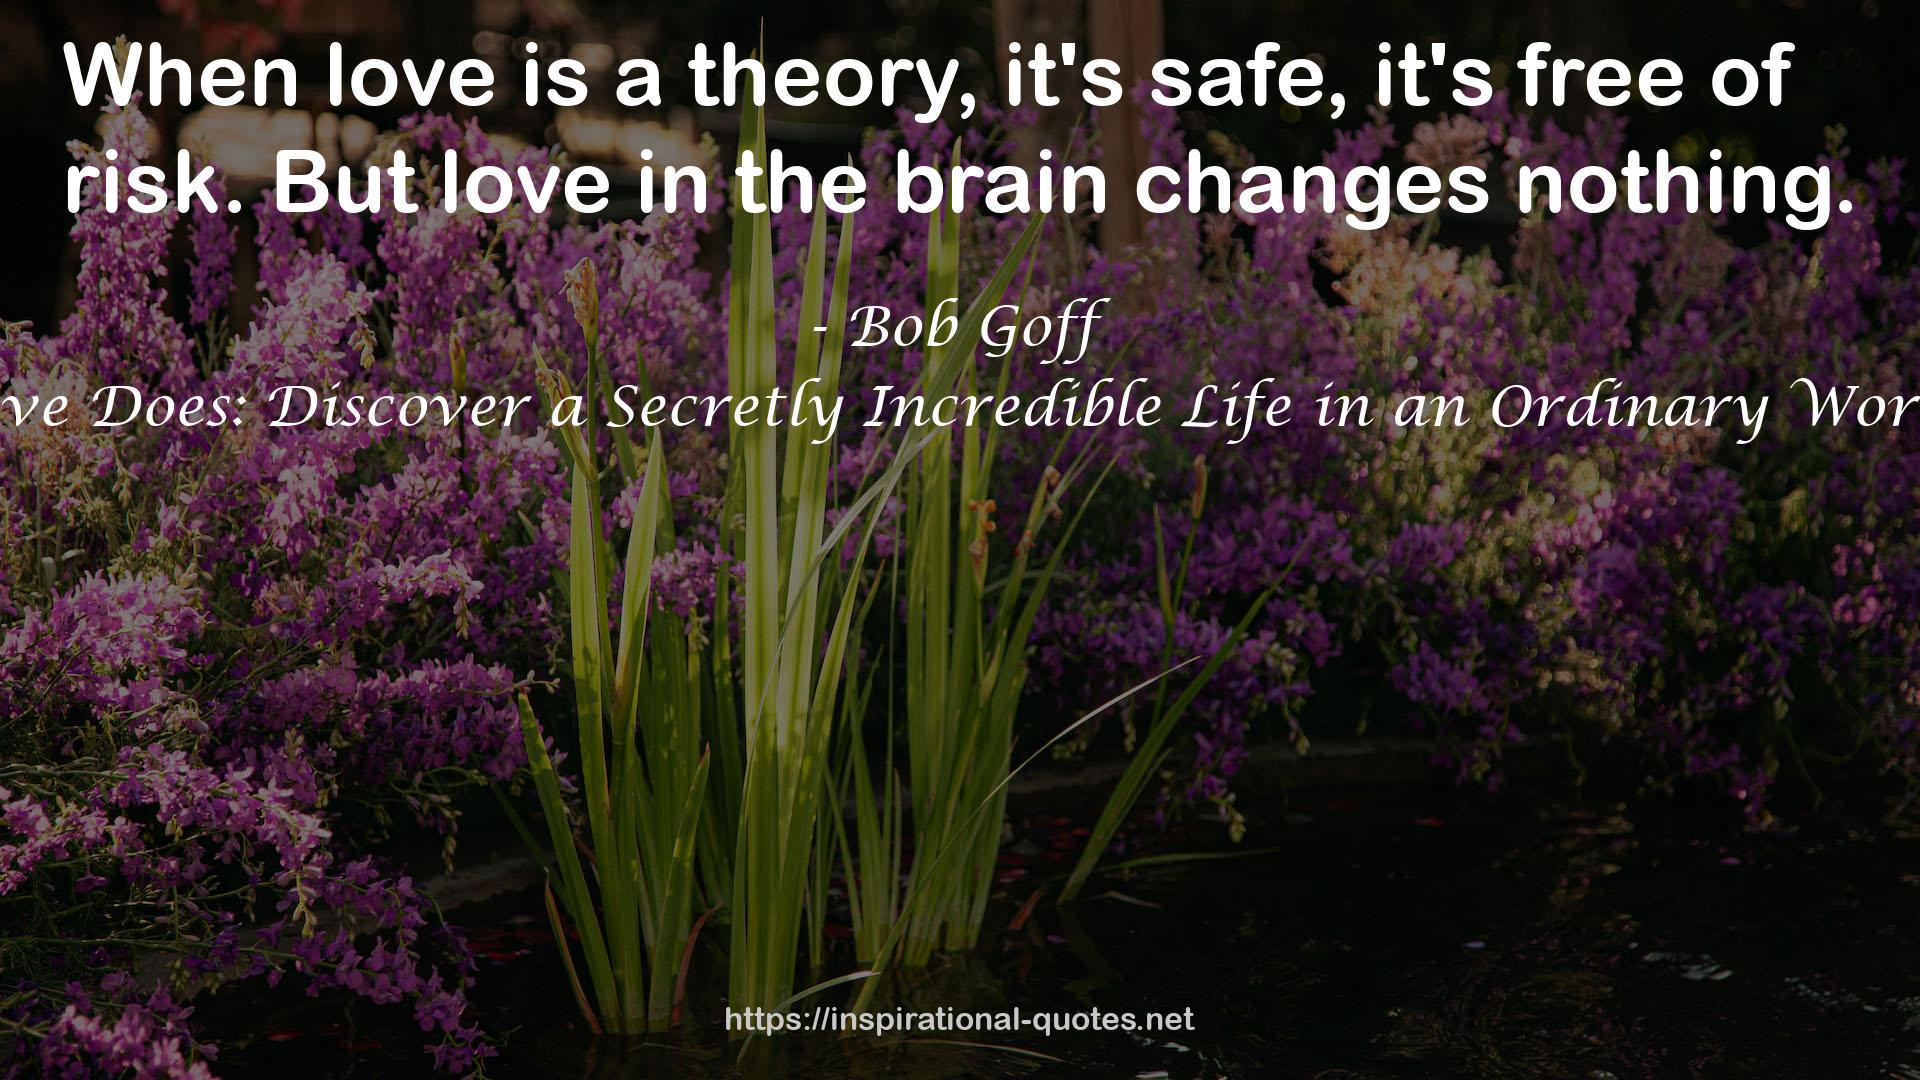 Love Does: Discover a Secretly Incredible Life in an Ordinary World QUOTES